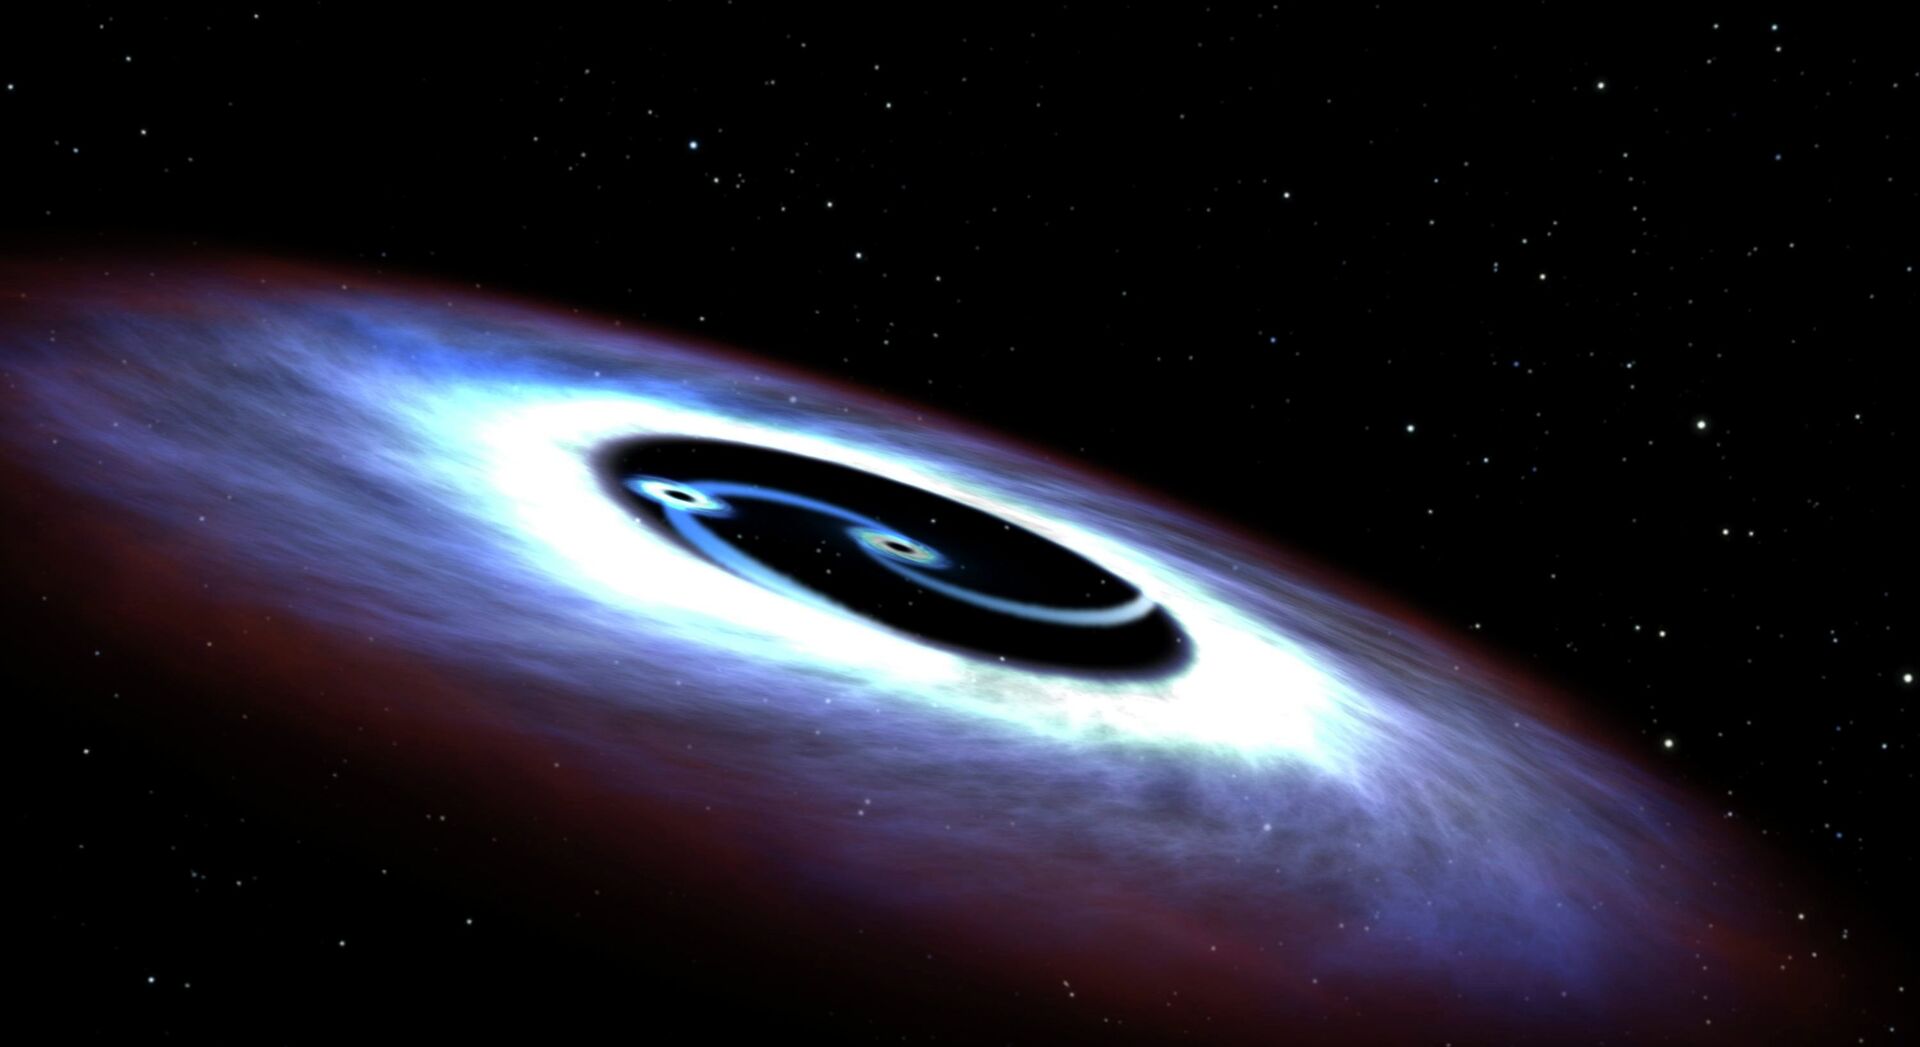 Gigantic Jet Detected From Black Hole in Early Universe May Unravel Astronomical Mysteries - Sputnik International, 1920, 13.03.2021